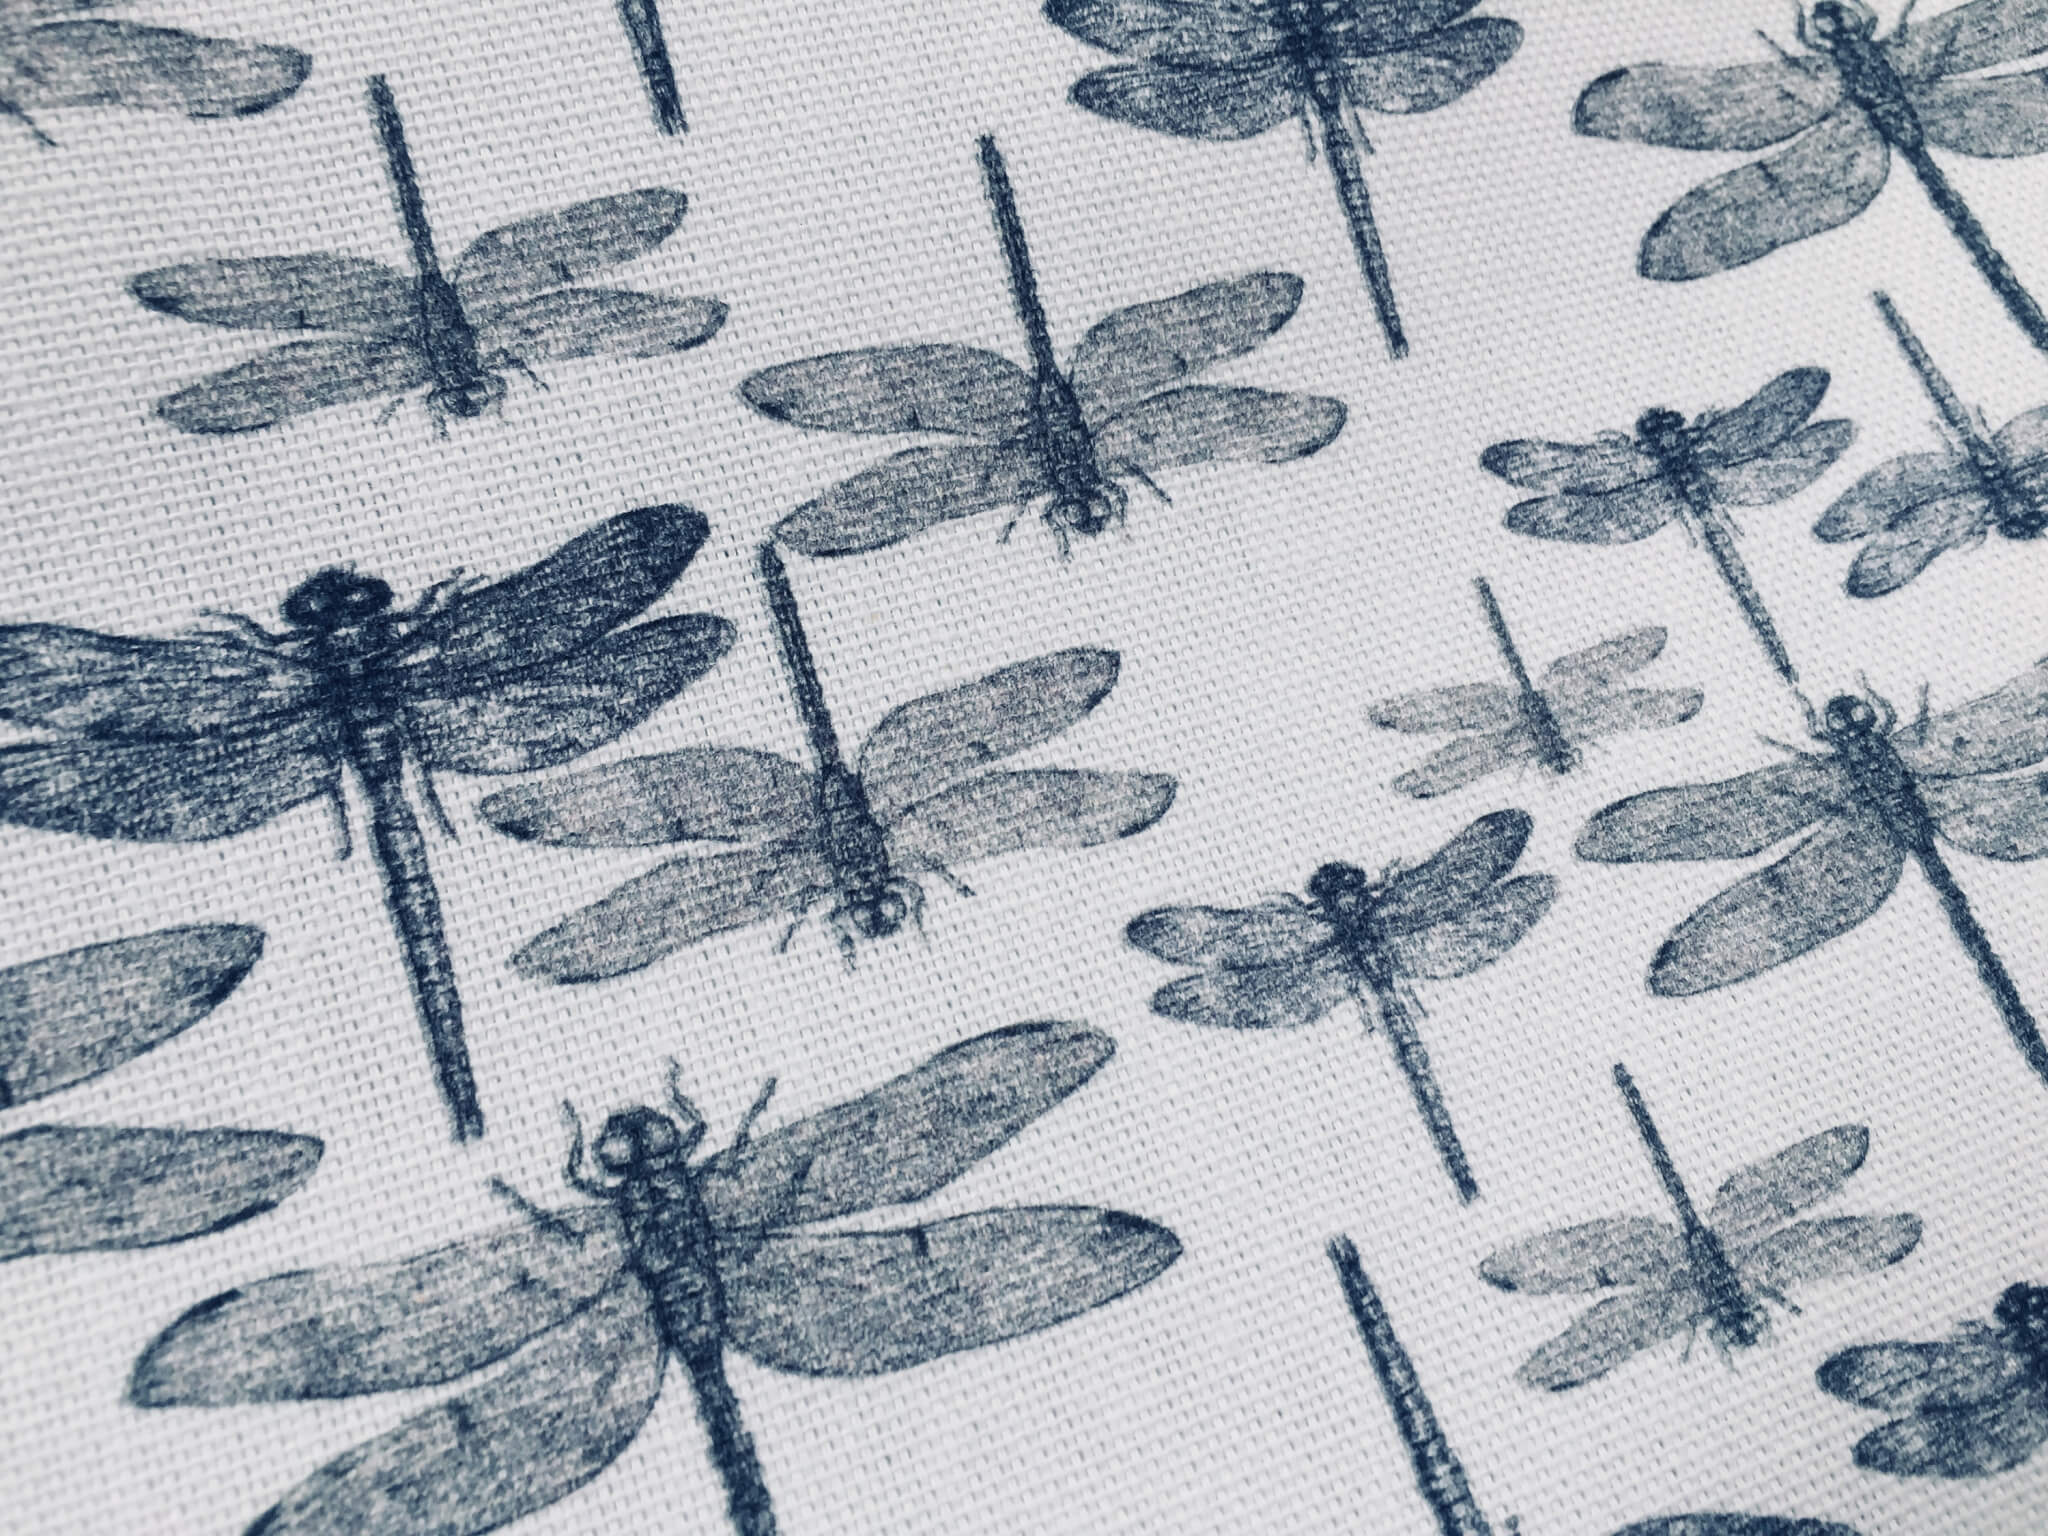 Botanical Dragonfly Linen Natural Insects Nature Voyage Style Fabric Curtains 